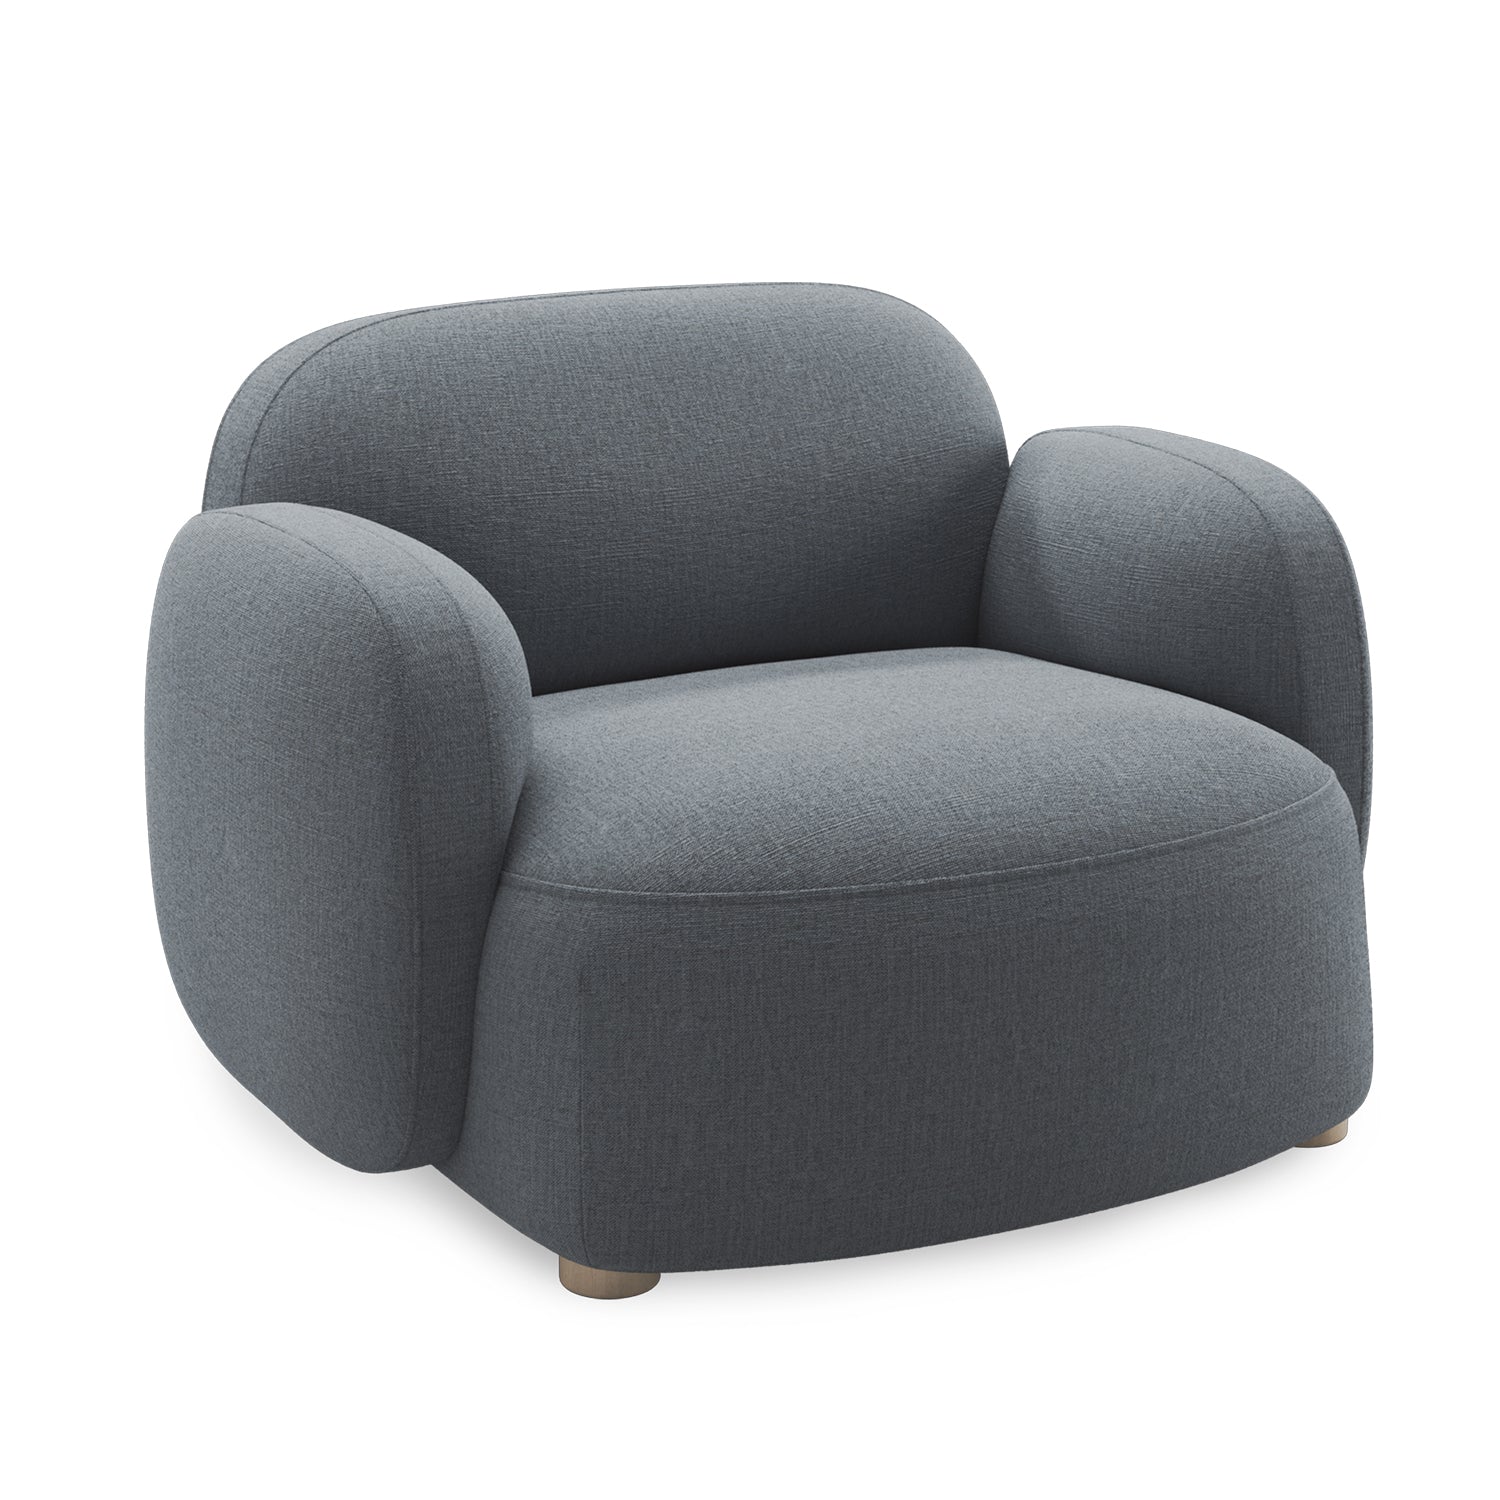 Northern Gem Lounge Chair with Armrest in  Brusvik 94